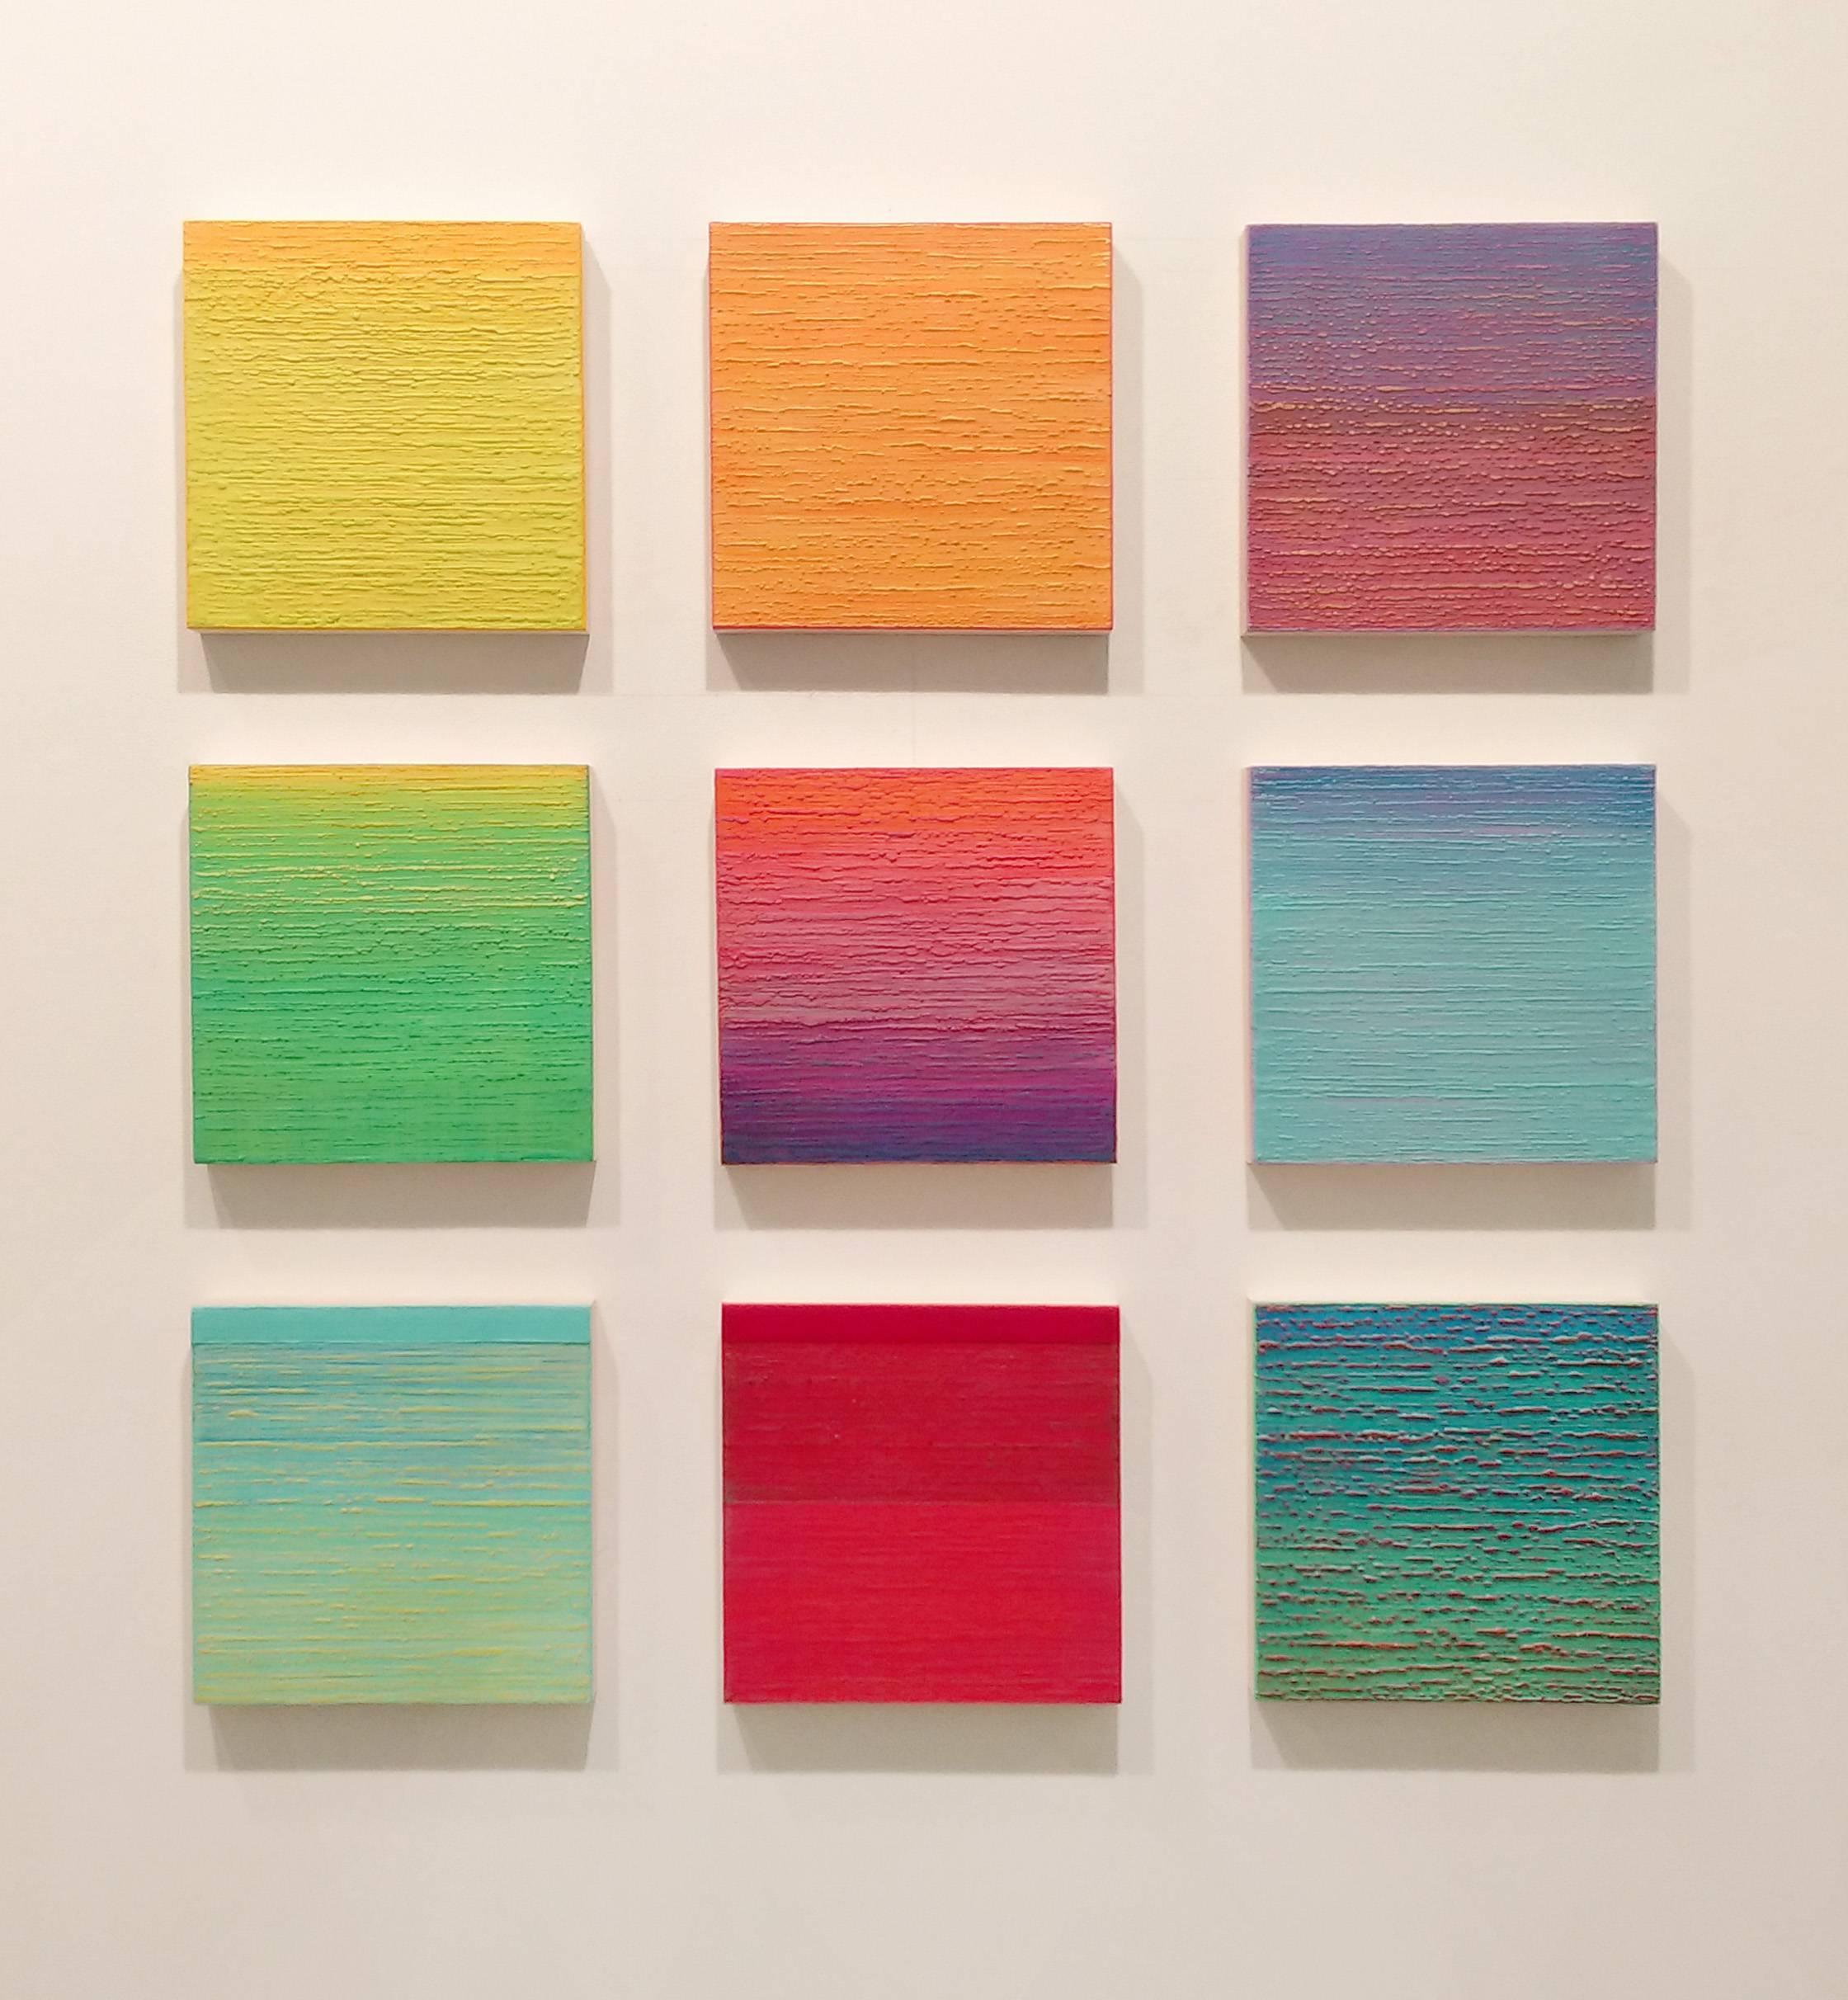 Joanne Mattera's Silk Road 363 is primarily yellow with a streak of orange.

Succulent in color and reductive or repetitive in composition, Joanne Mattera’s ongoing Silk Road series of paintings are achieved by manipulating layers of translucent wax